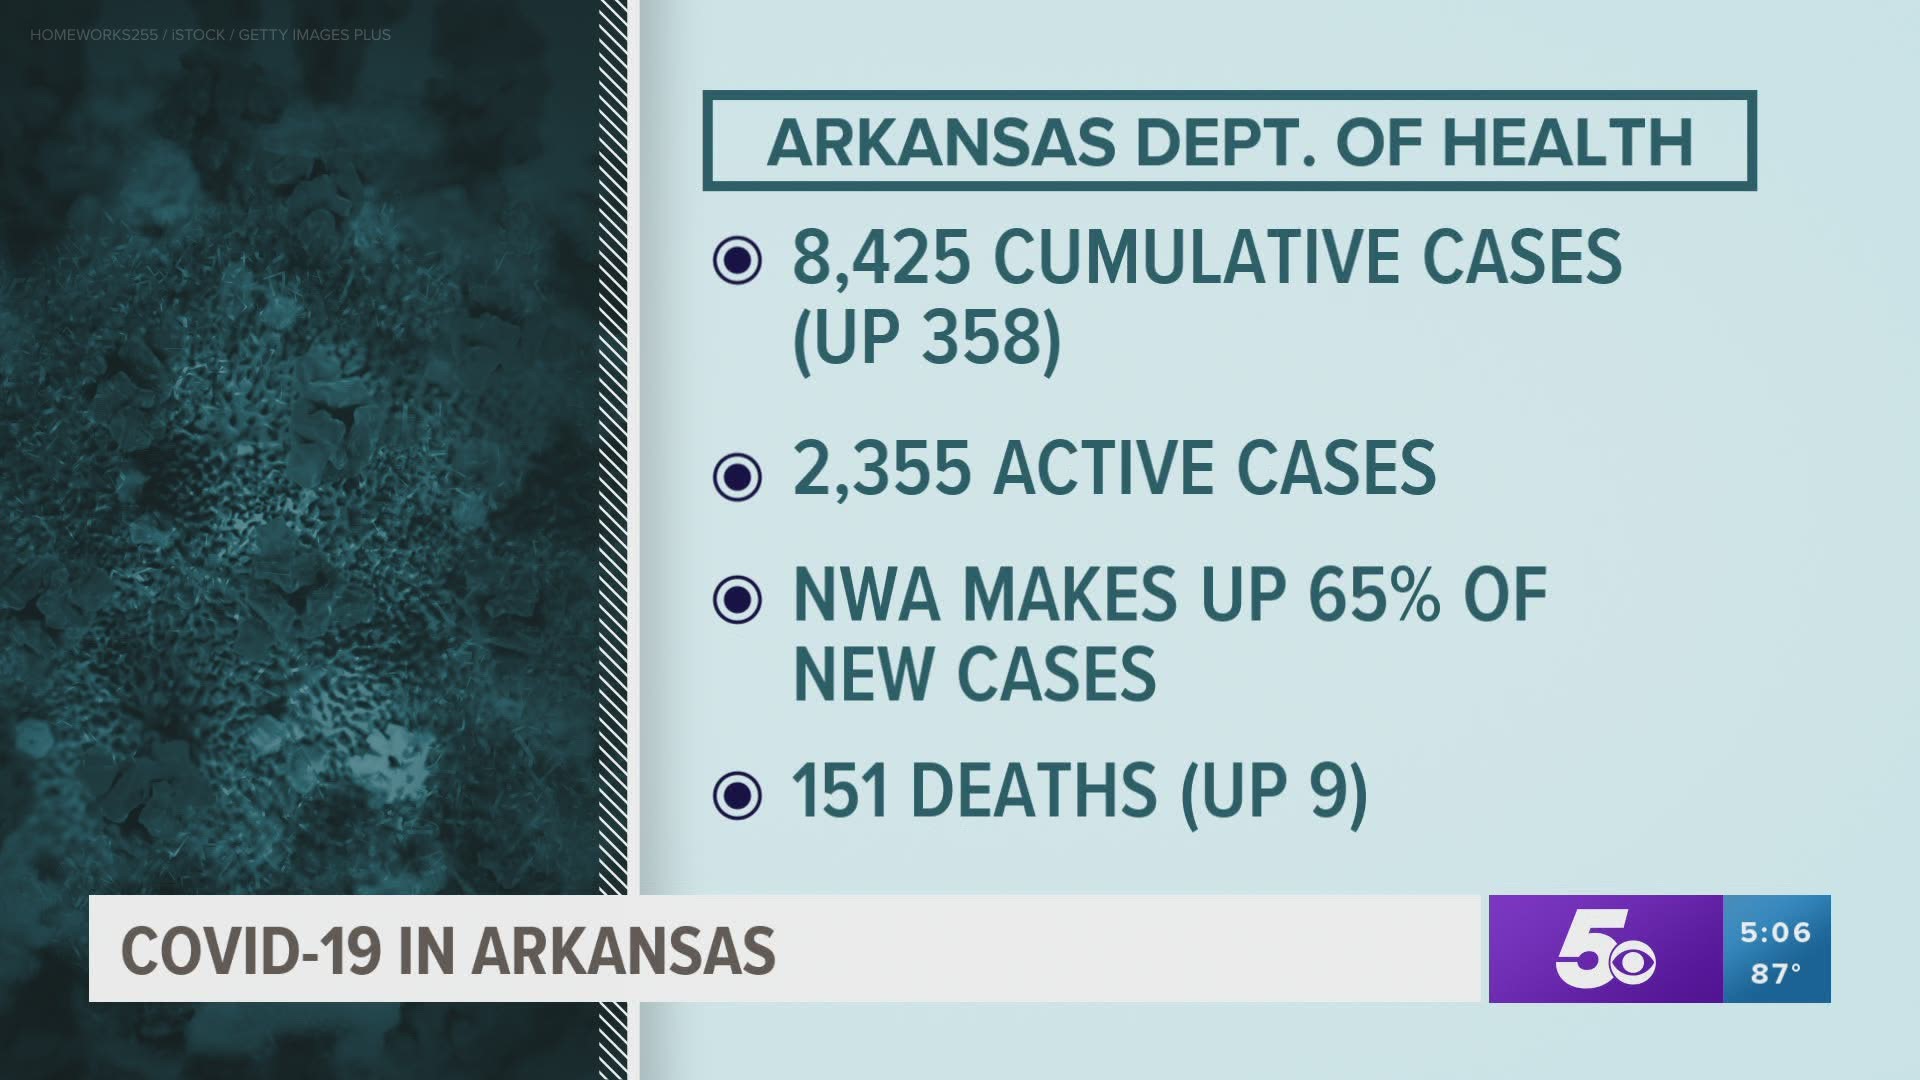 All positive coronavirus cases are confirmed through the Arkansas Department of Health.